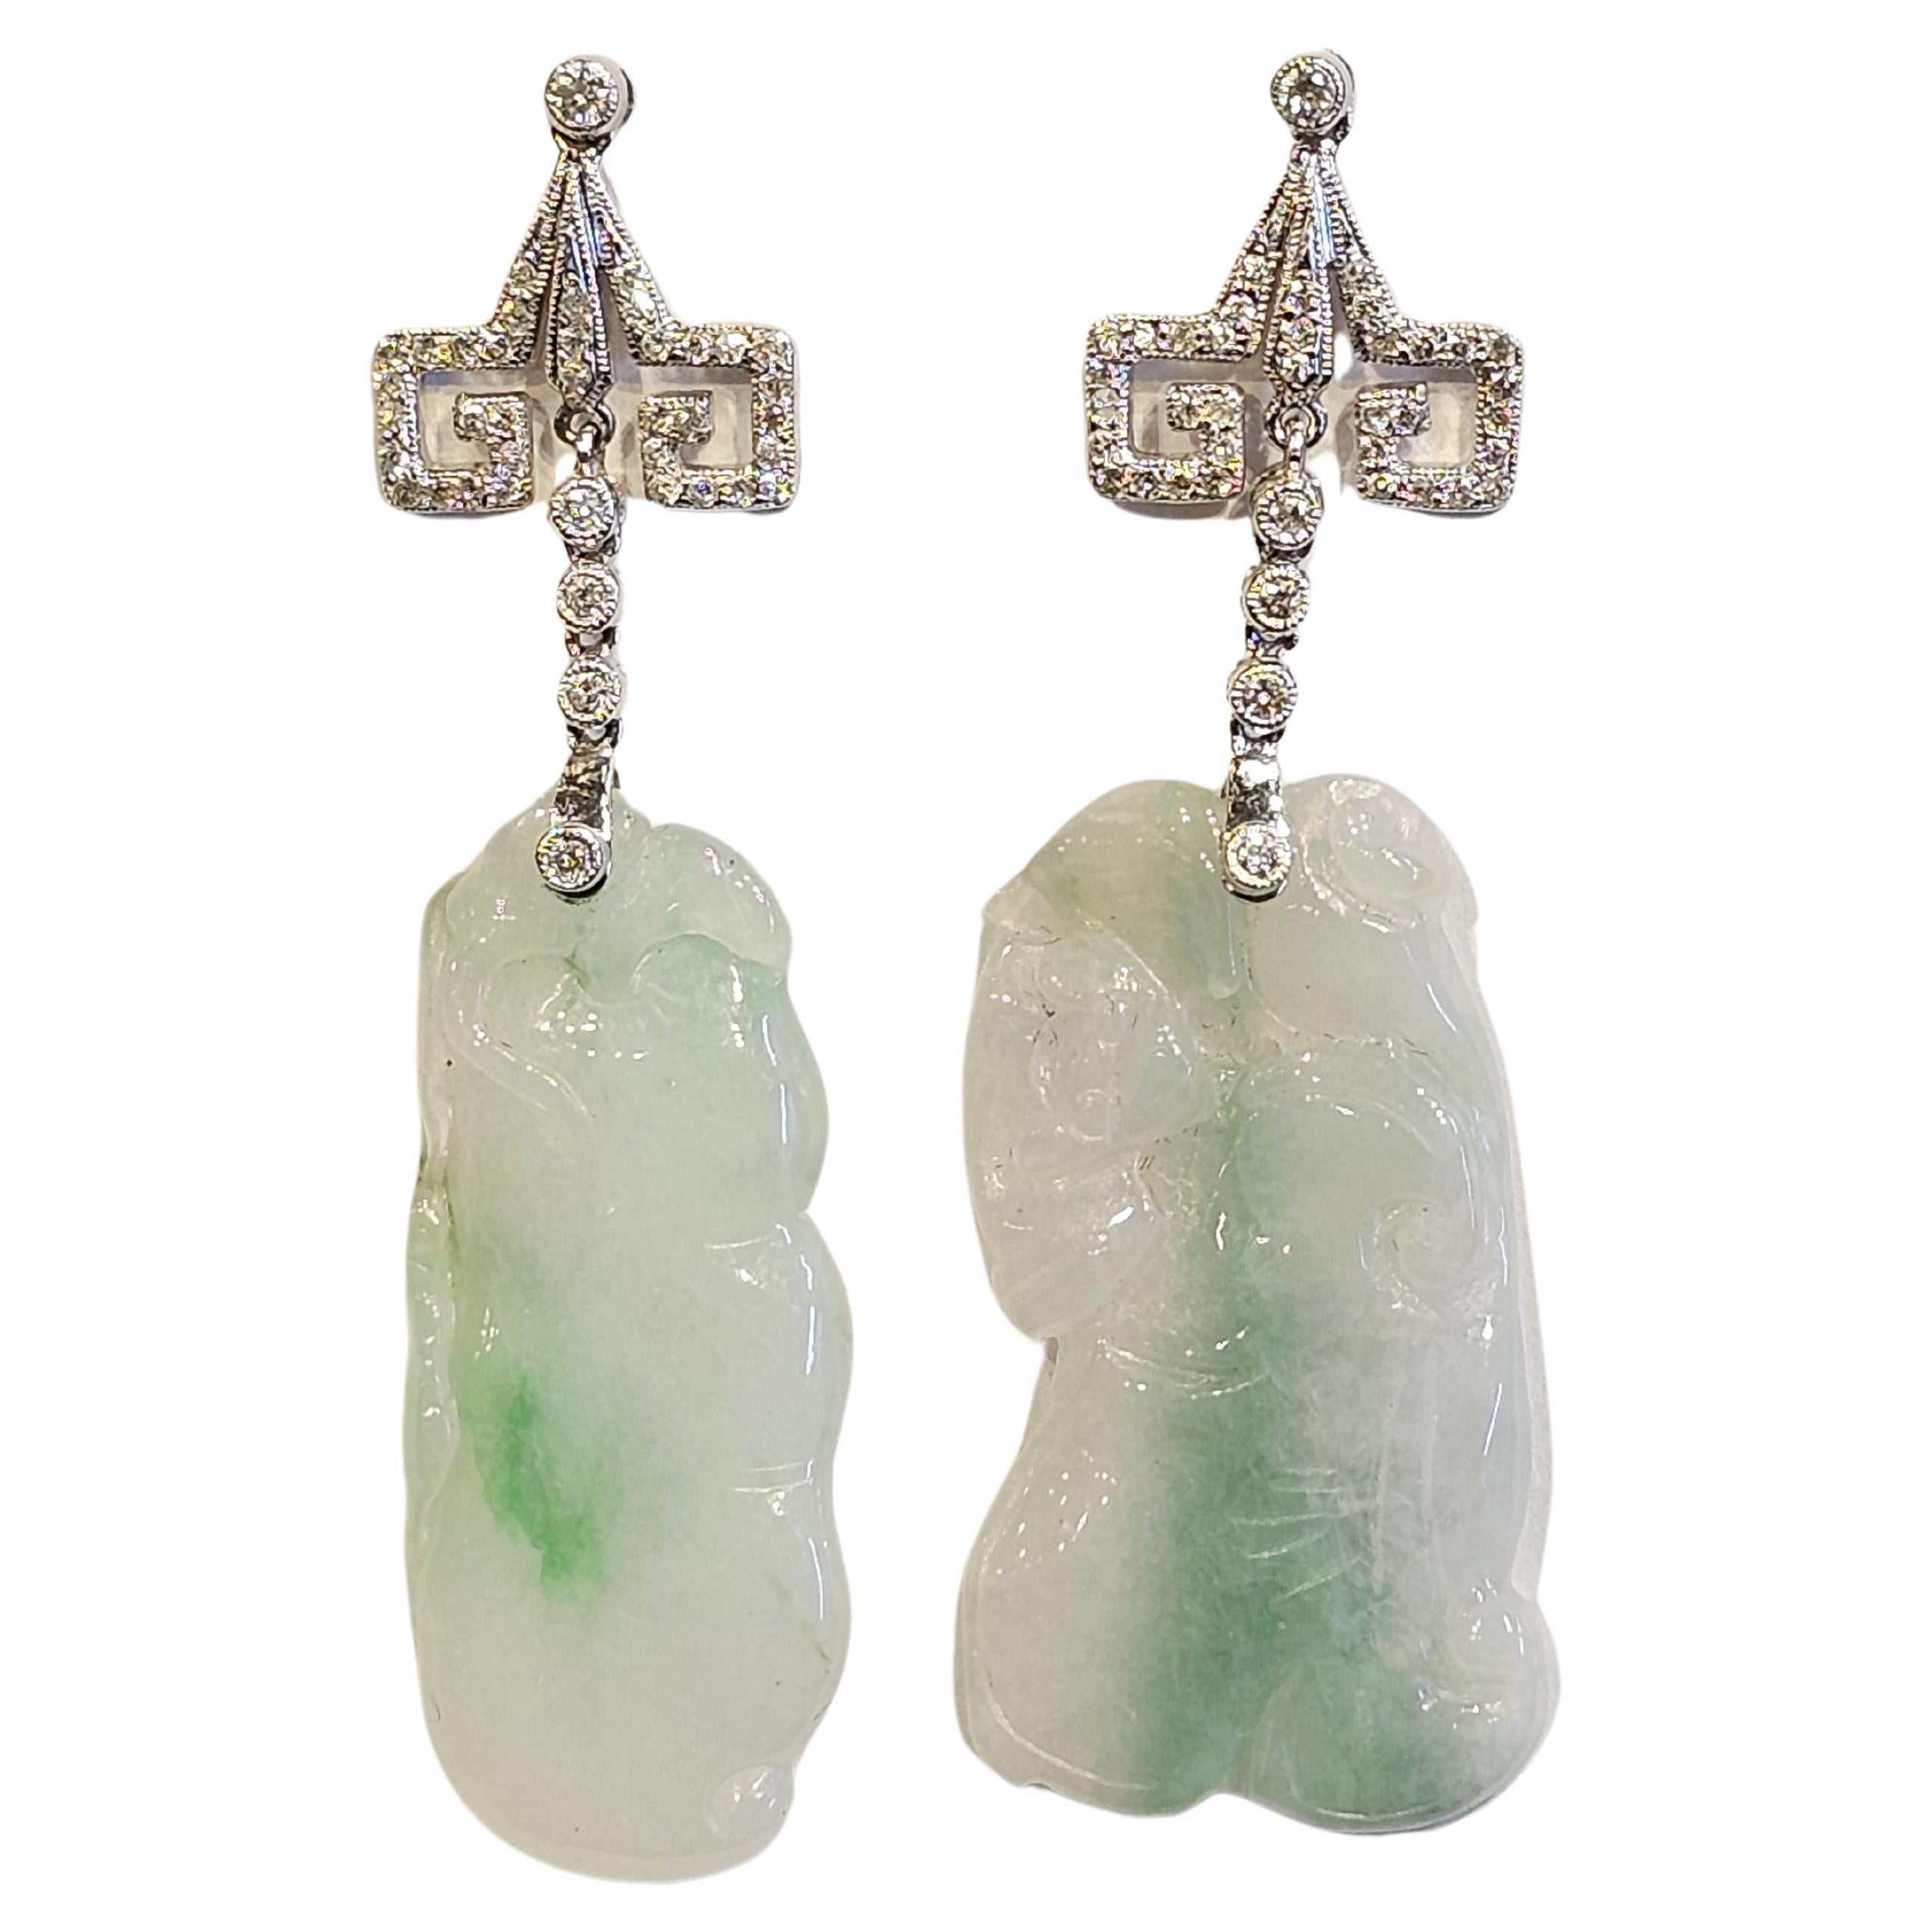 Carved Jade & Diamond Earrings

A pair of 18 karat white gold earrings set with approximately half a carat of round cut diamonds and 2 carved jade stones

Length: 2.38